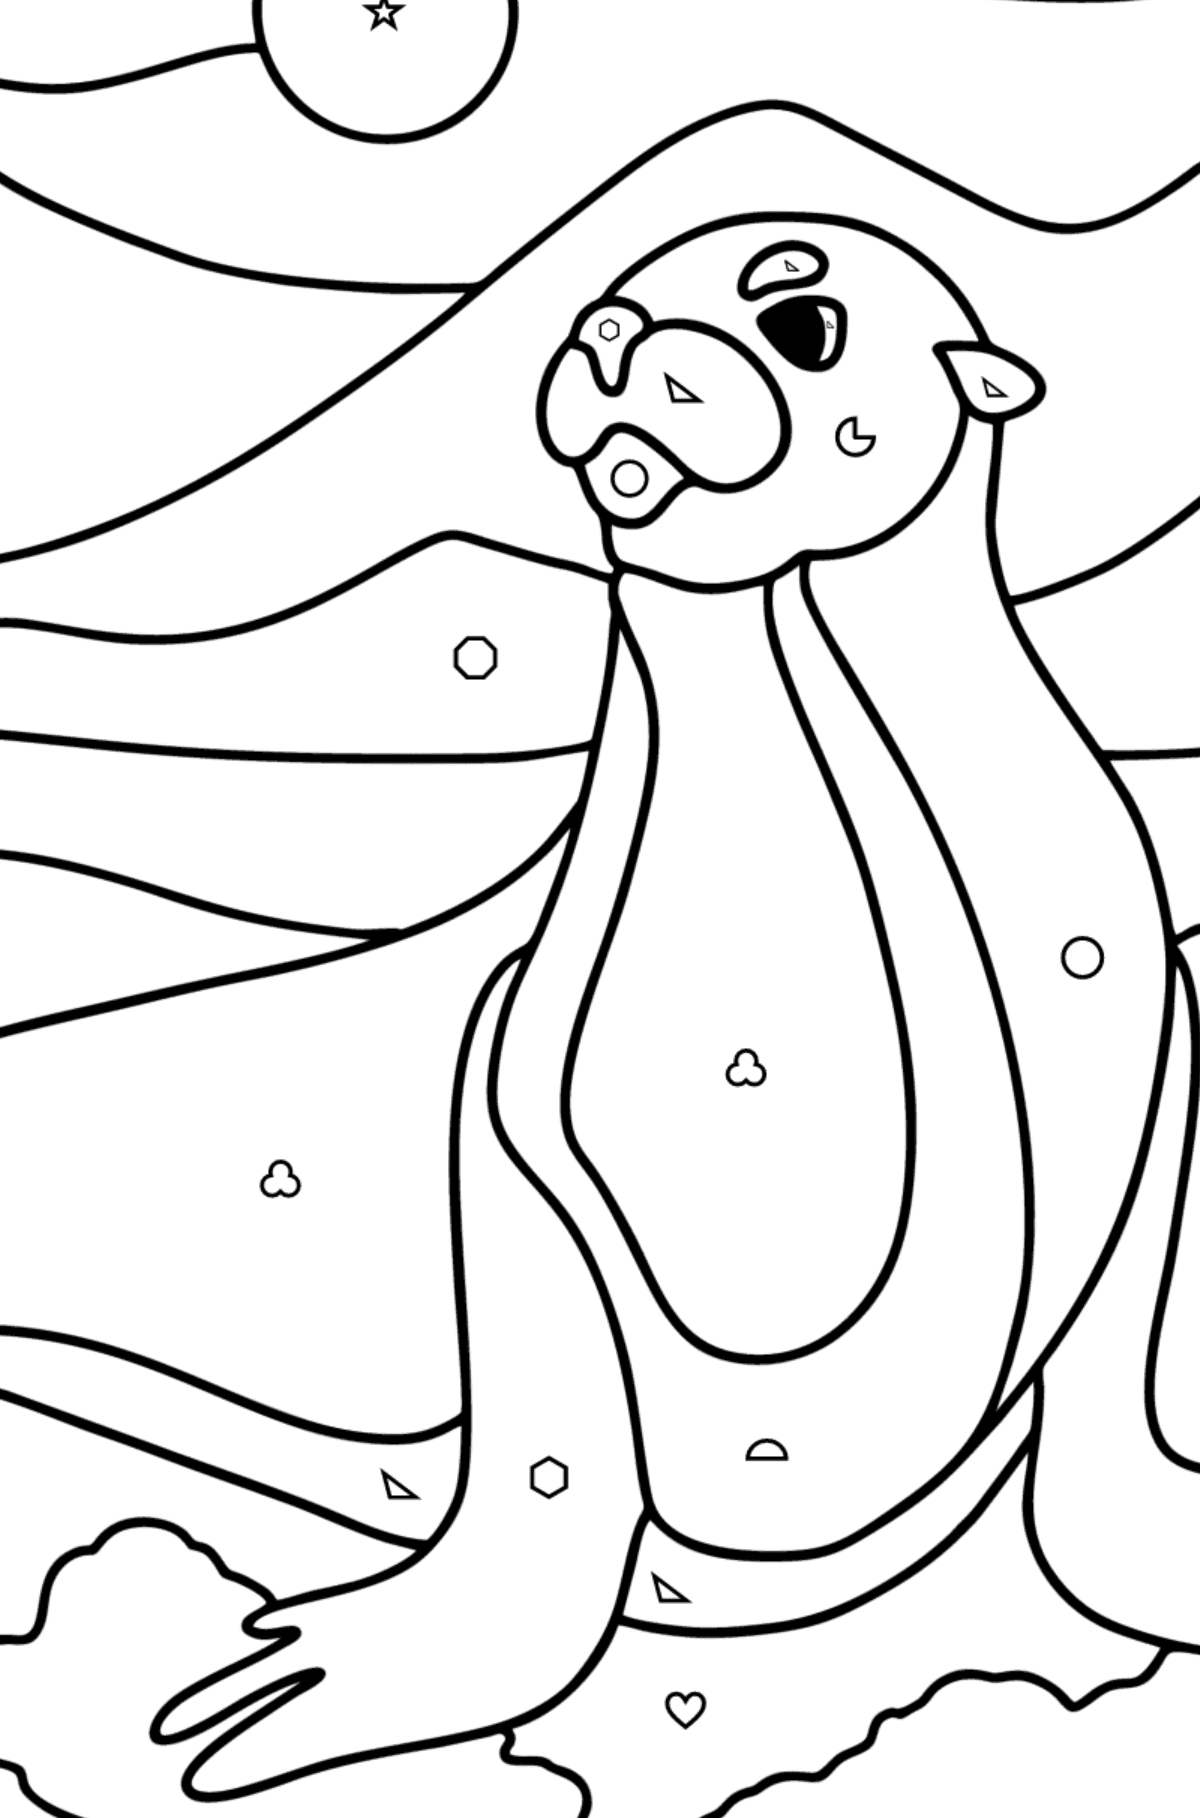 Sea lion coloring page - Coloring by Geometric Shapes for Kids